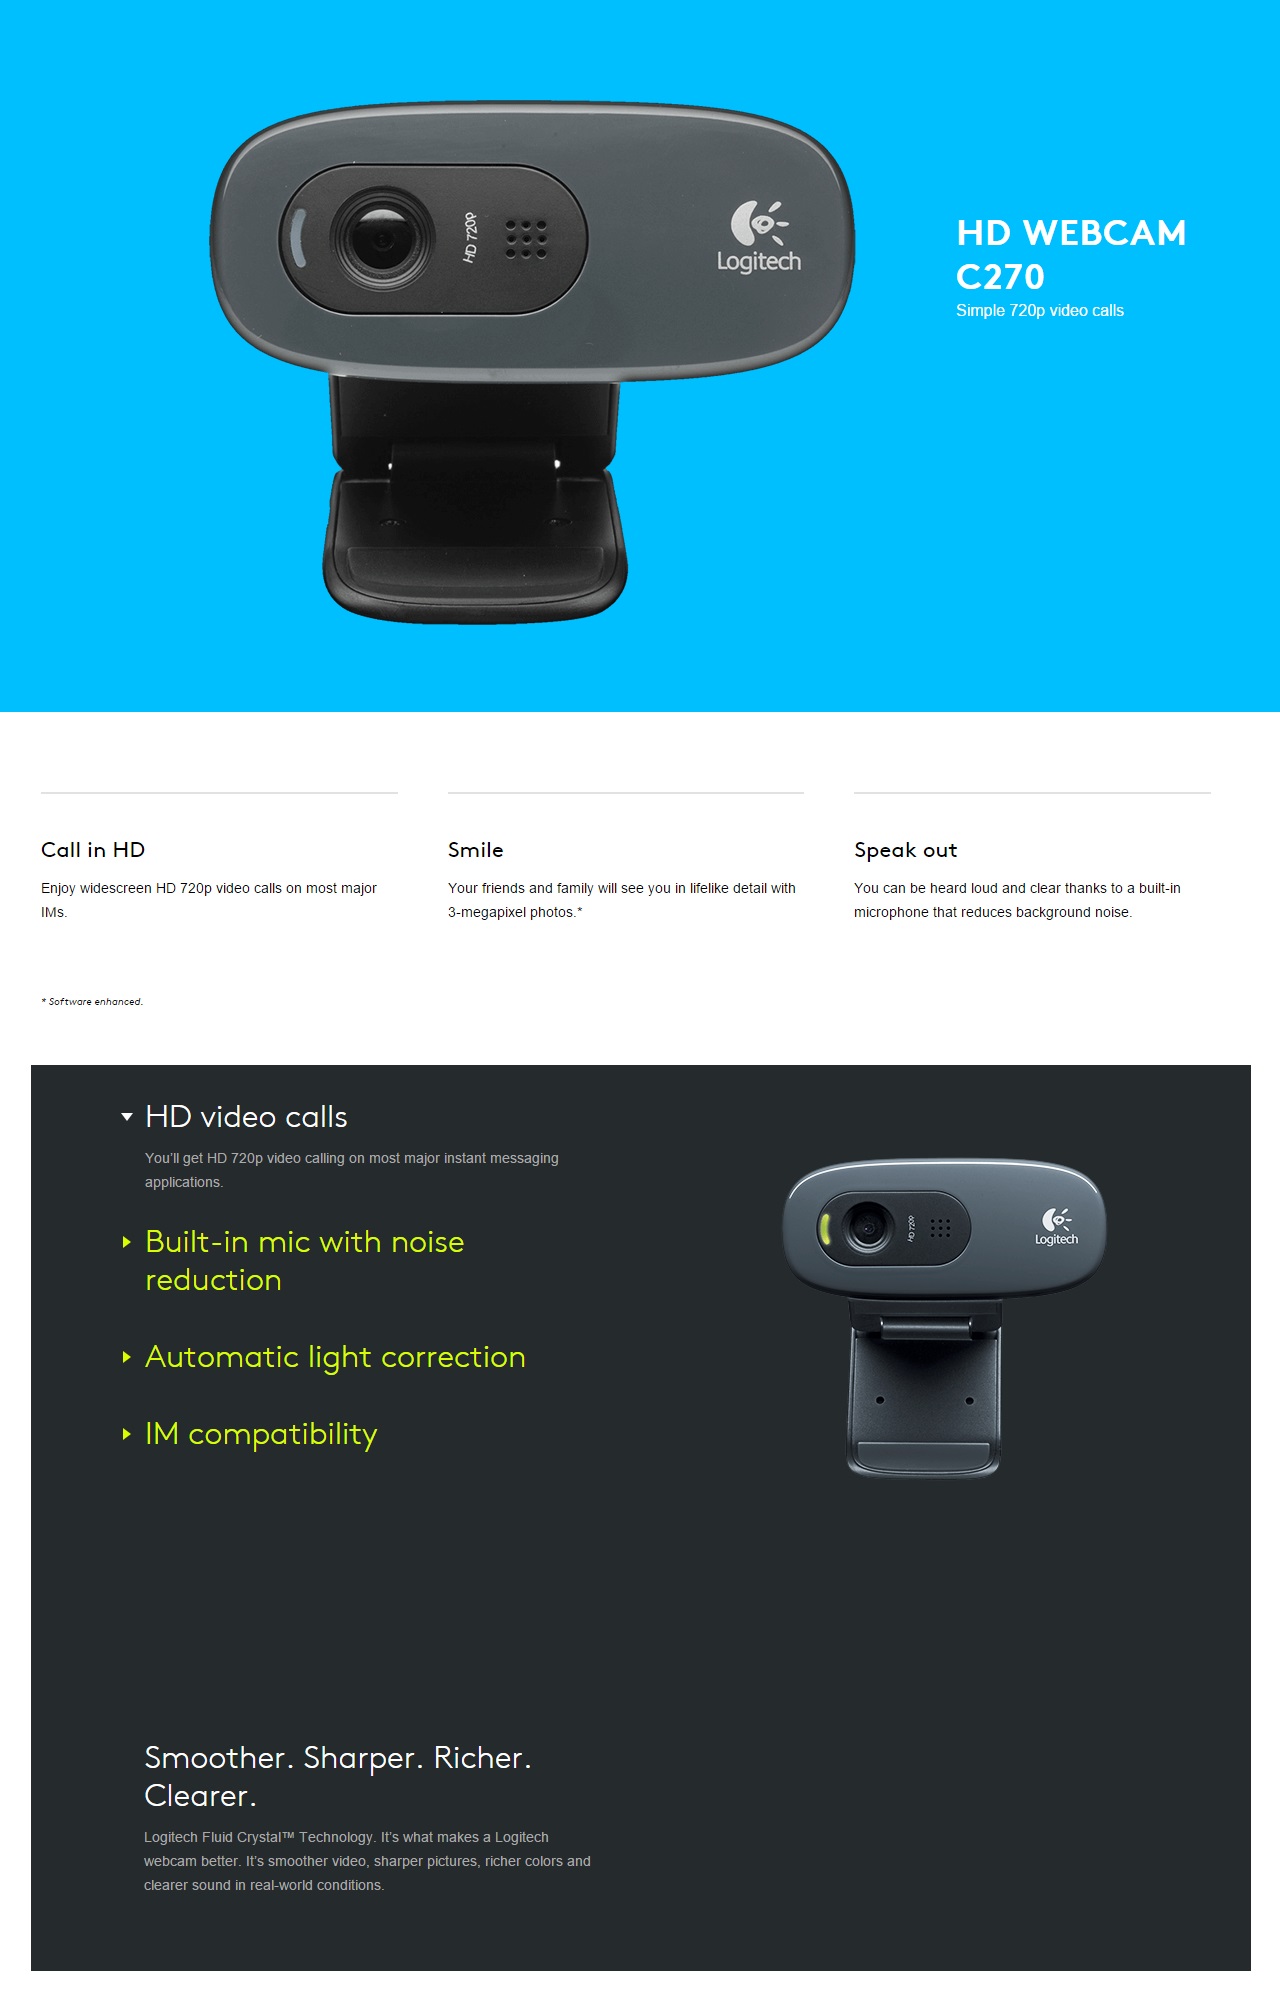 A large marketing image providing additional information about the product Logitech C270 720p Webcam - Additional alt info not provided